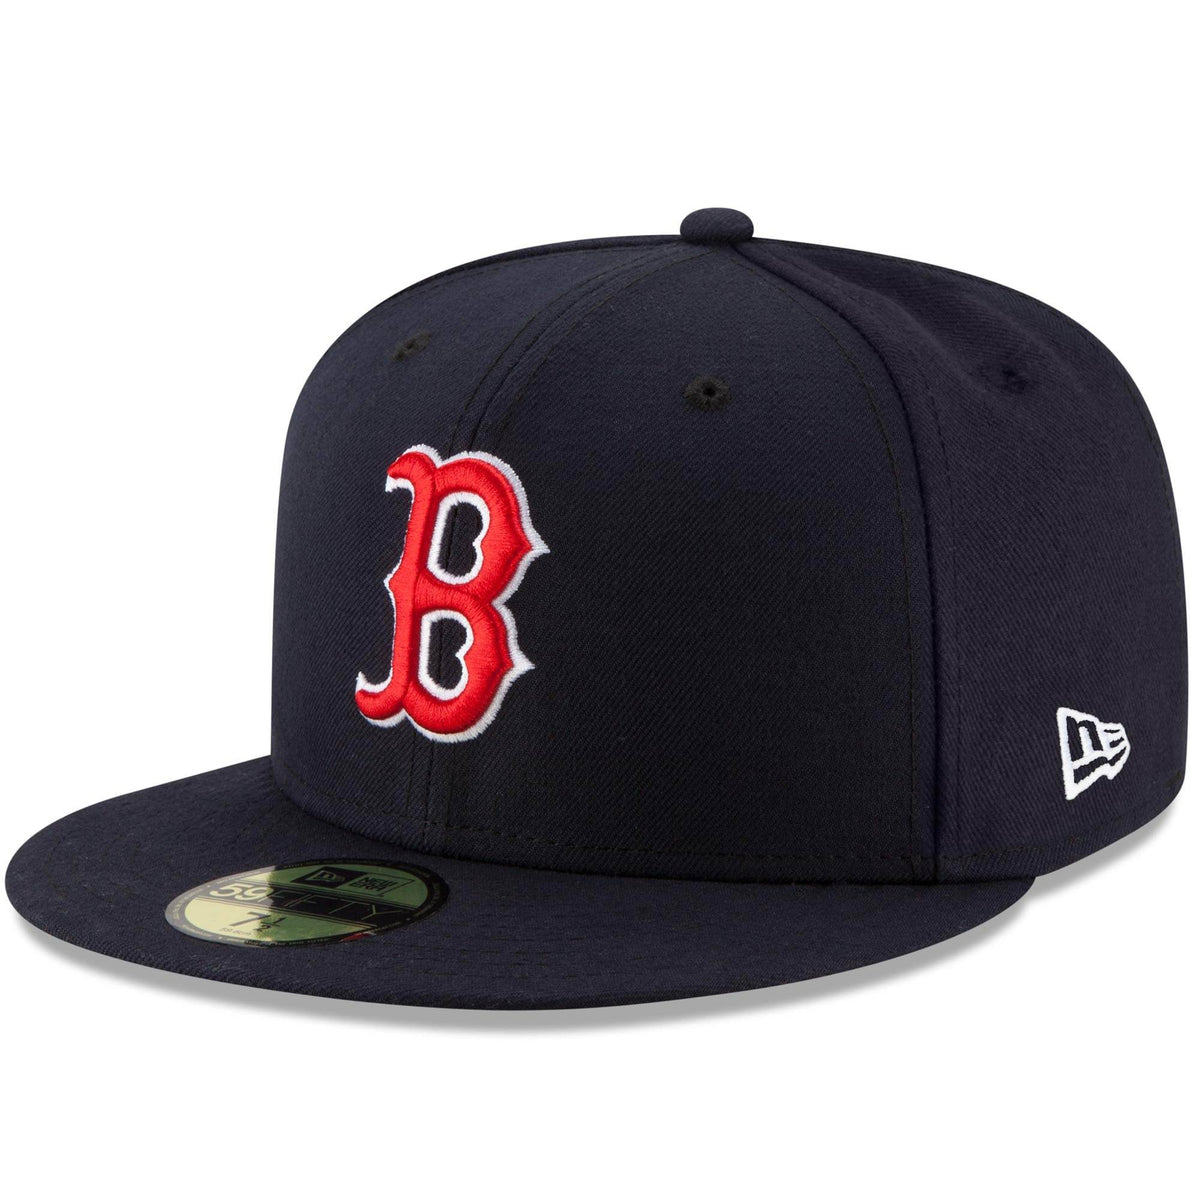 New Era Boston Red Sox 59FIFTY Authentic Collection Hat Navy 8